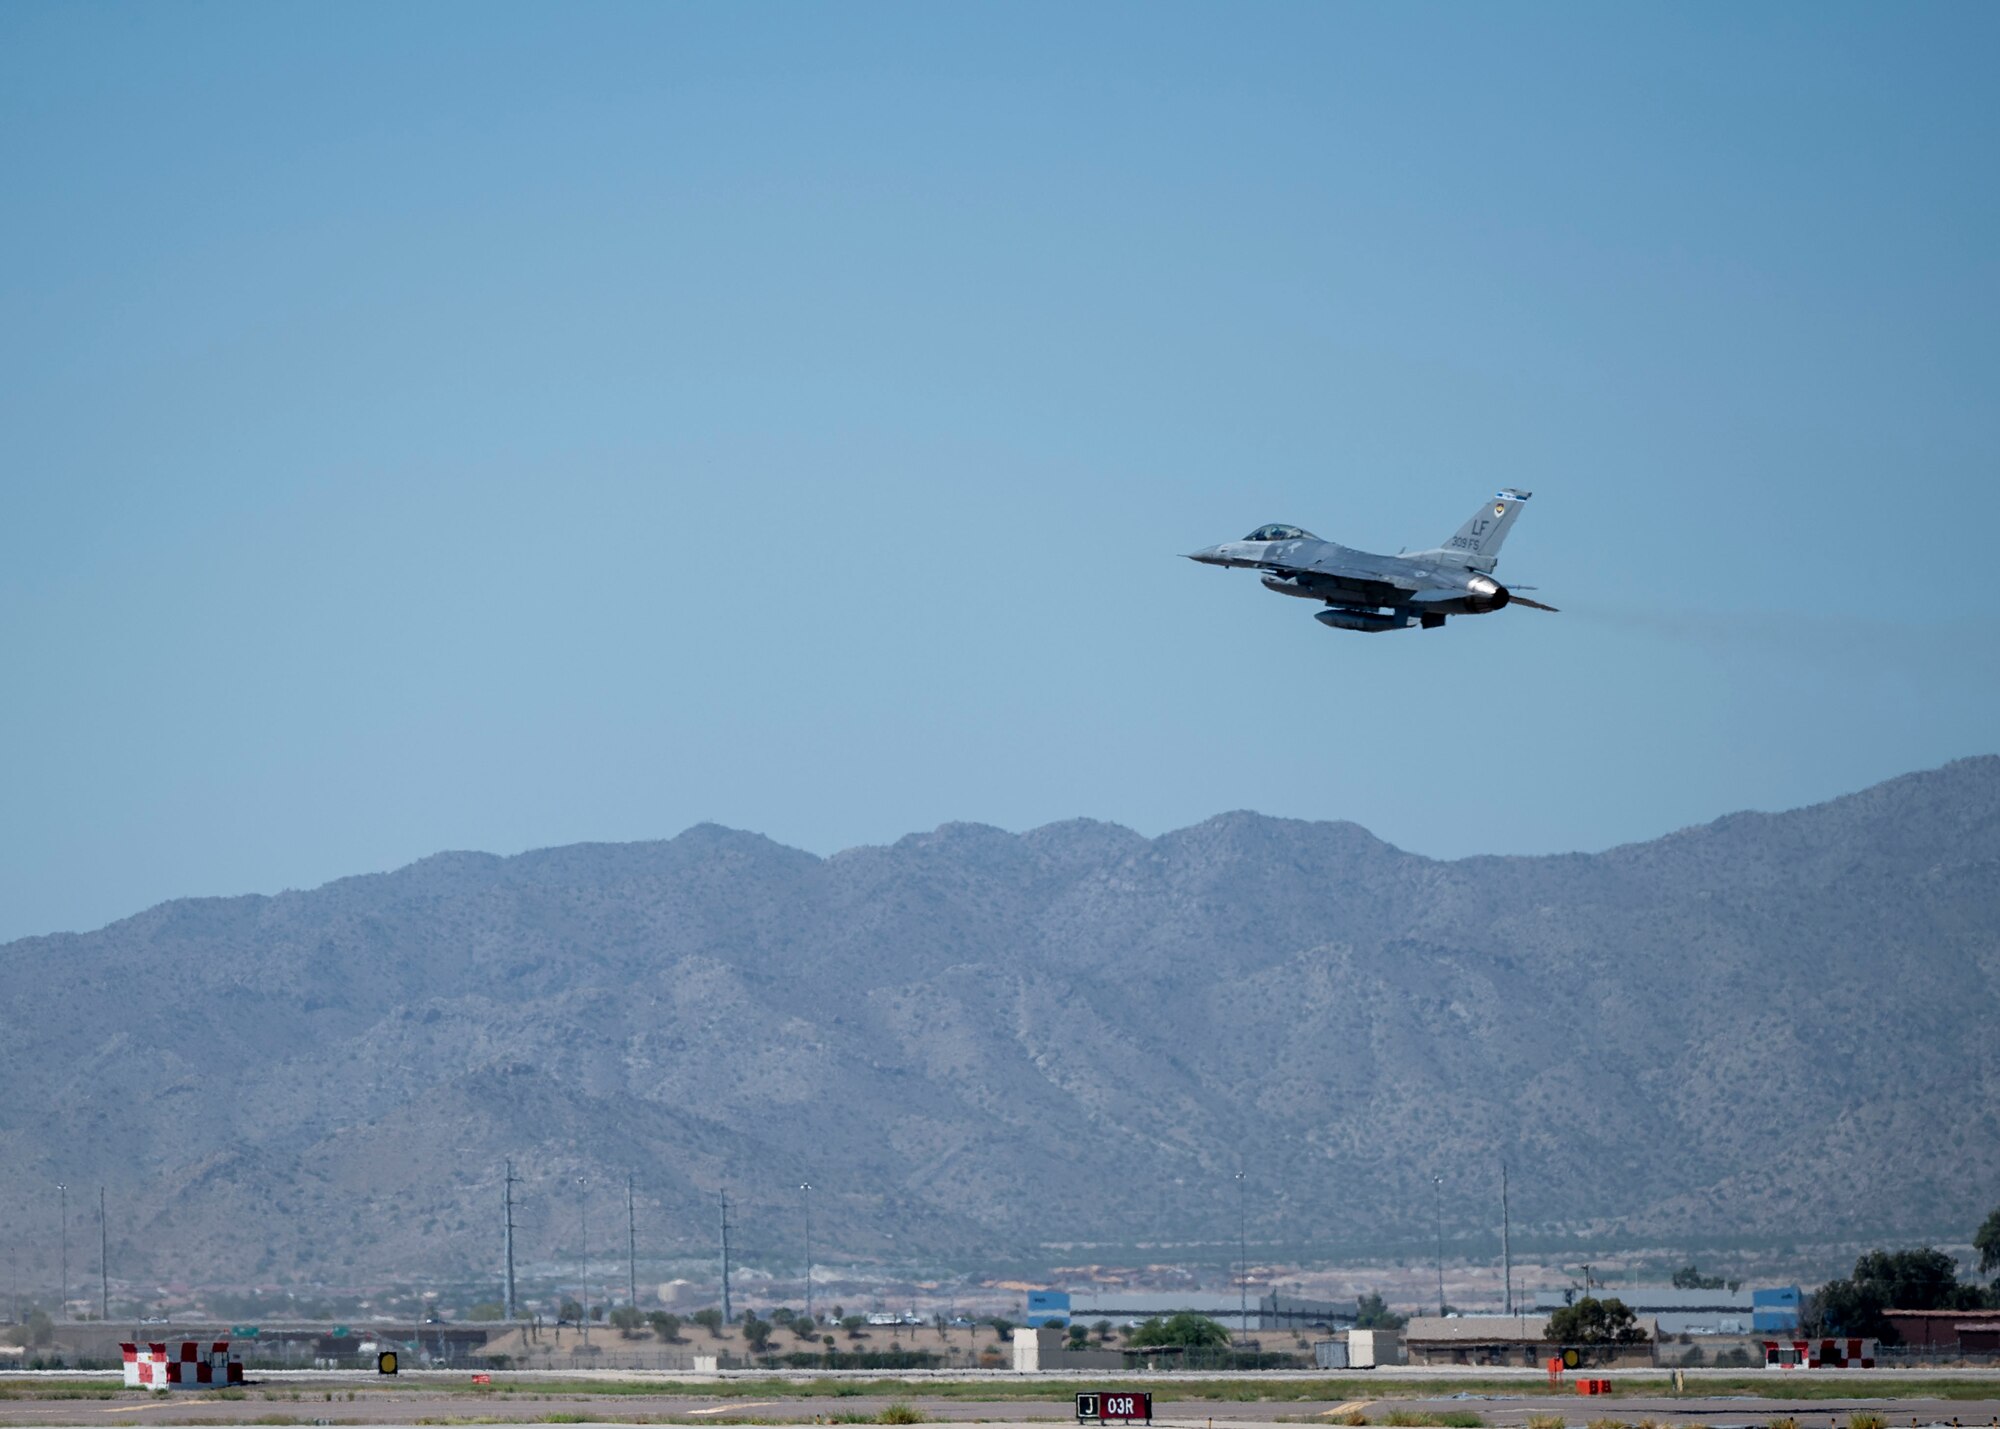 A retiring F-16 Fighting Falcon takes off for the last time in its tenure Sept. 6, 2022, at Luke Air Force Base, Arizona.